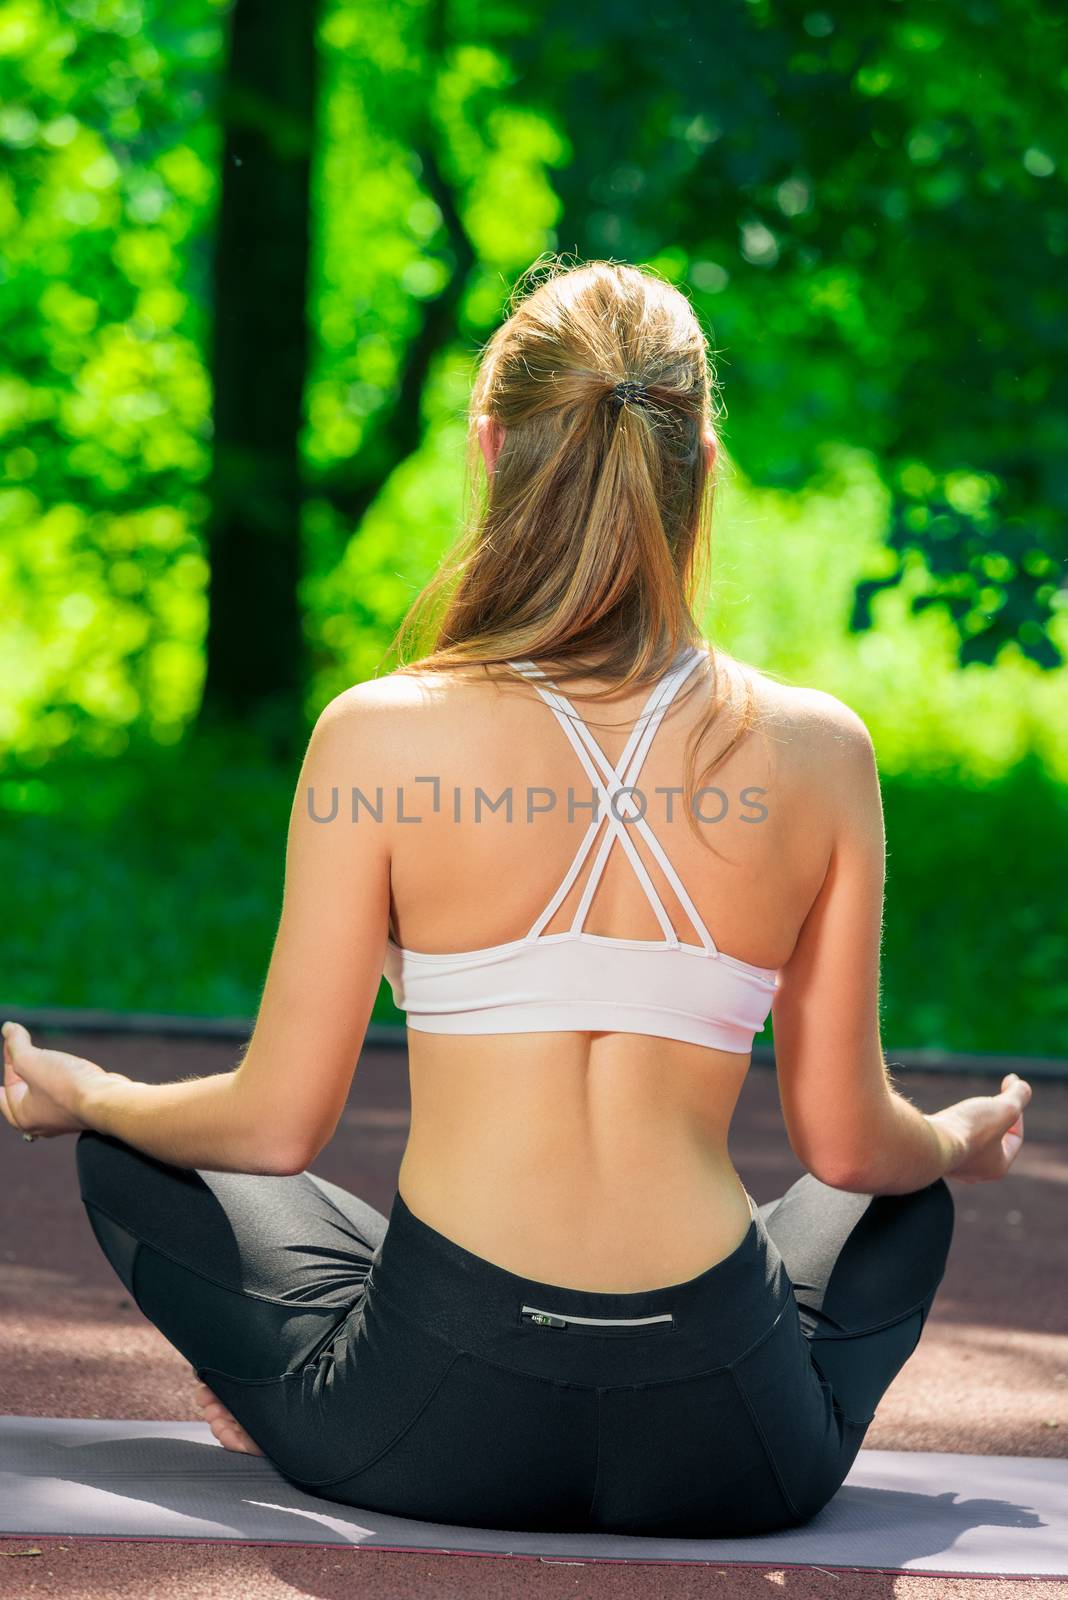 simple yoga asanas - trainer in lotus position view from the bac by kosmsos111